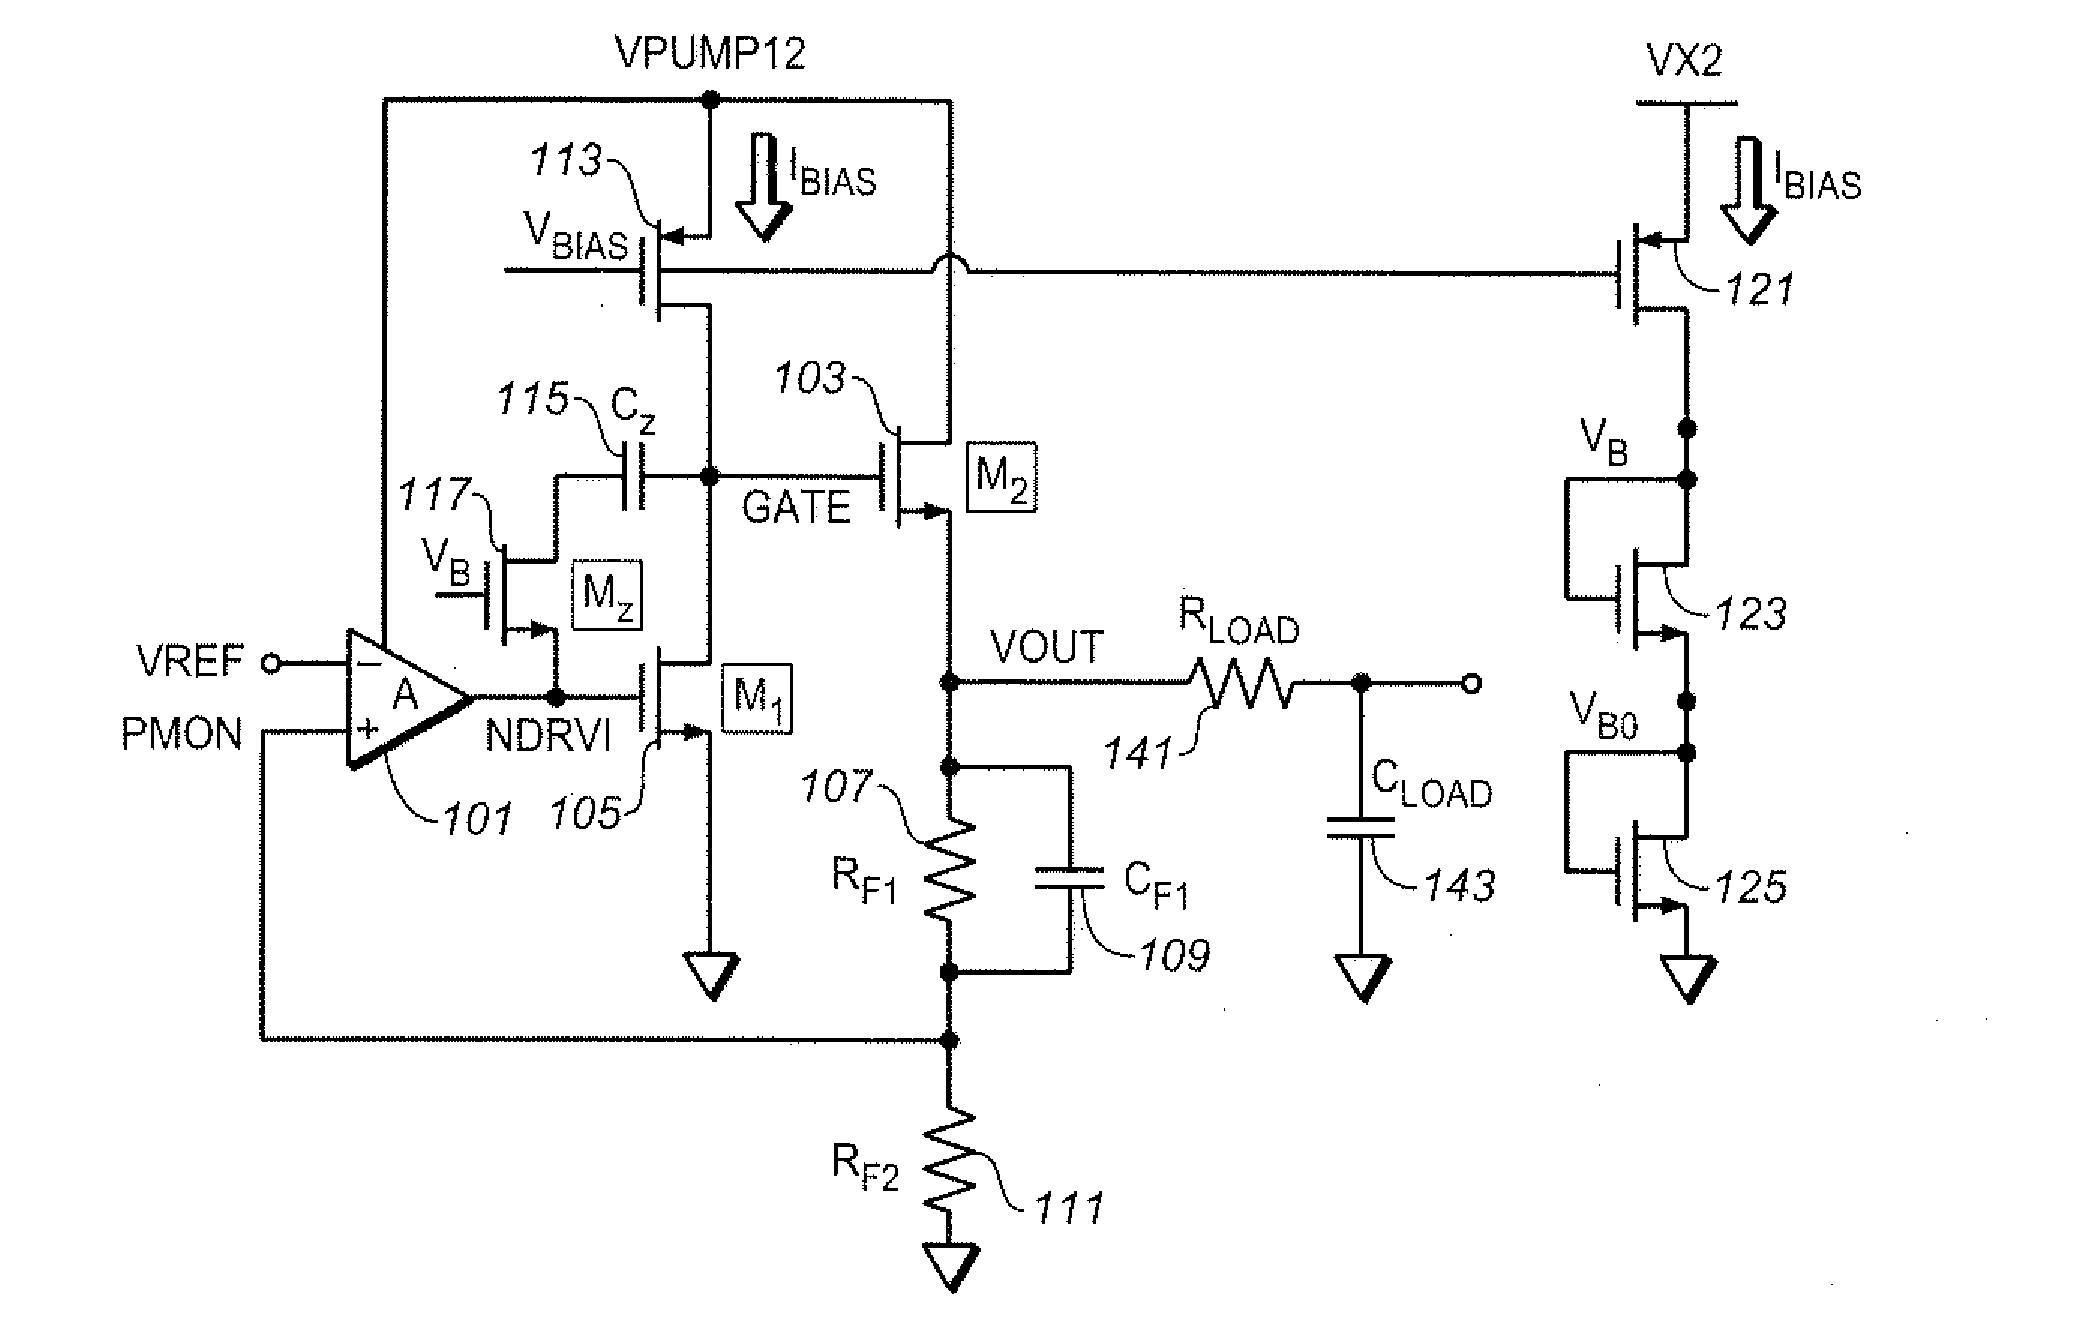 Compensation Scheme to Improve the Stability of the Operational Amplifiers